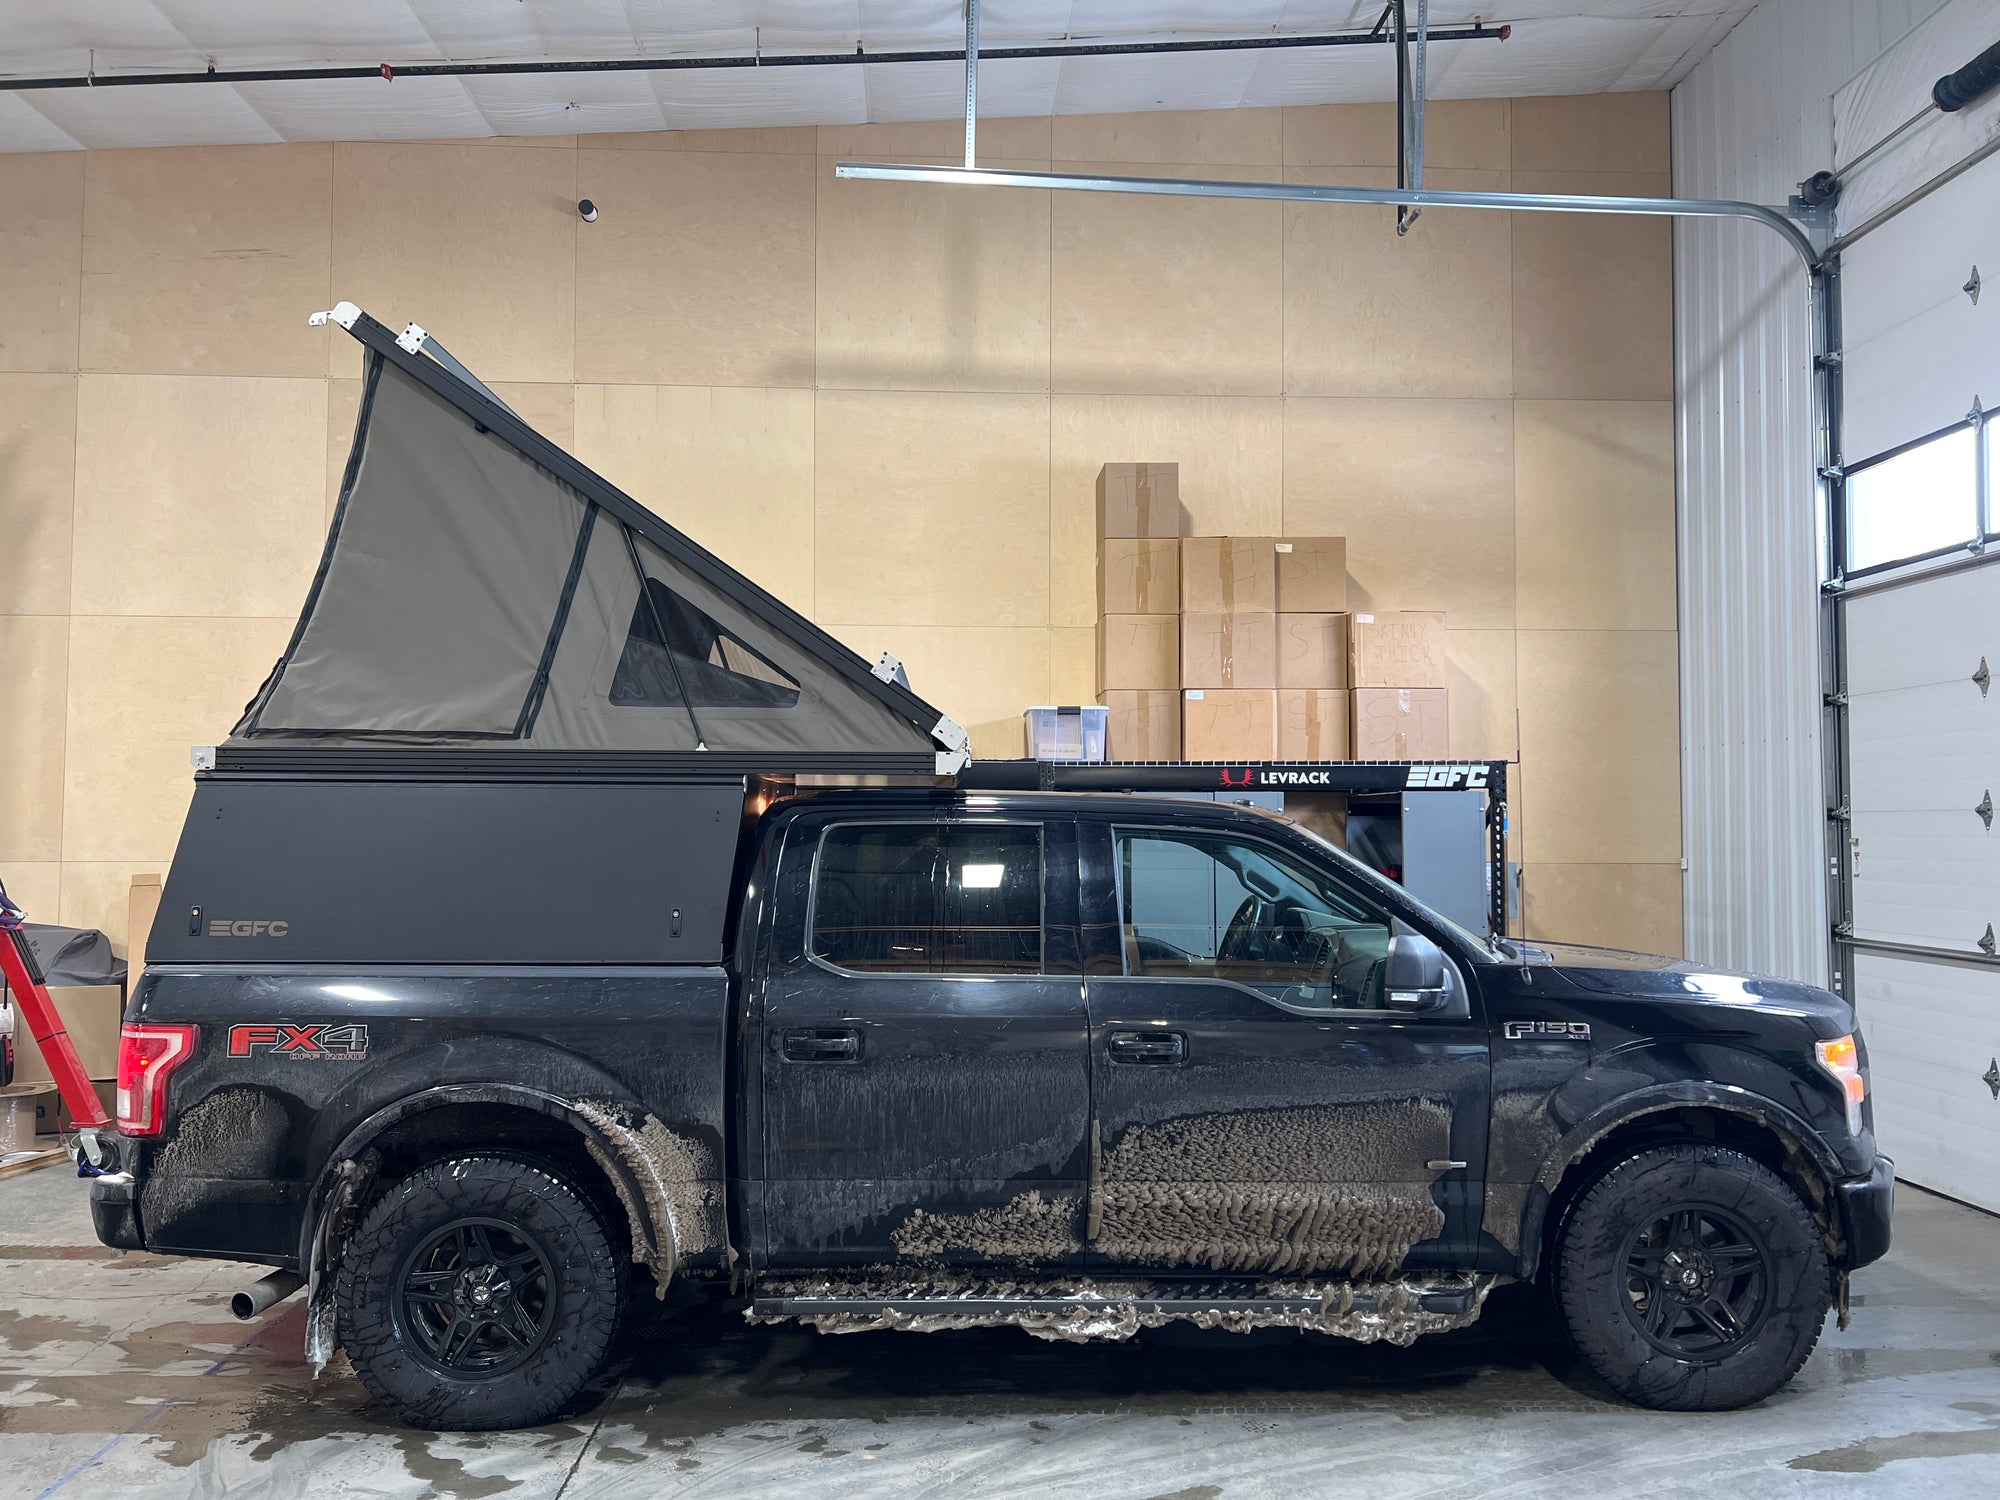 Customer Installs & Builds Tagged F150 - GoFastCampers